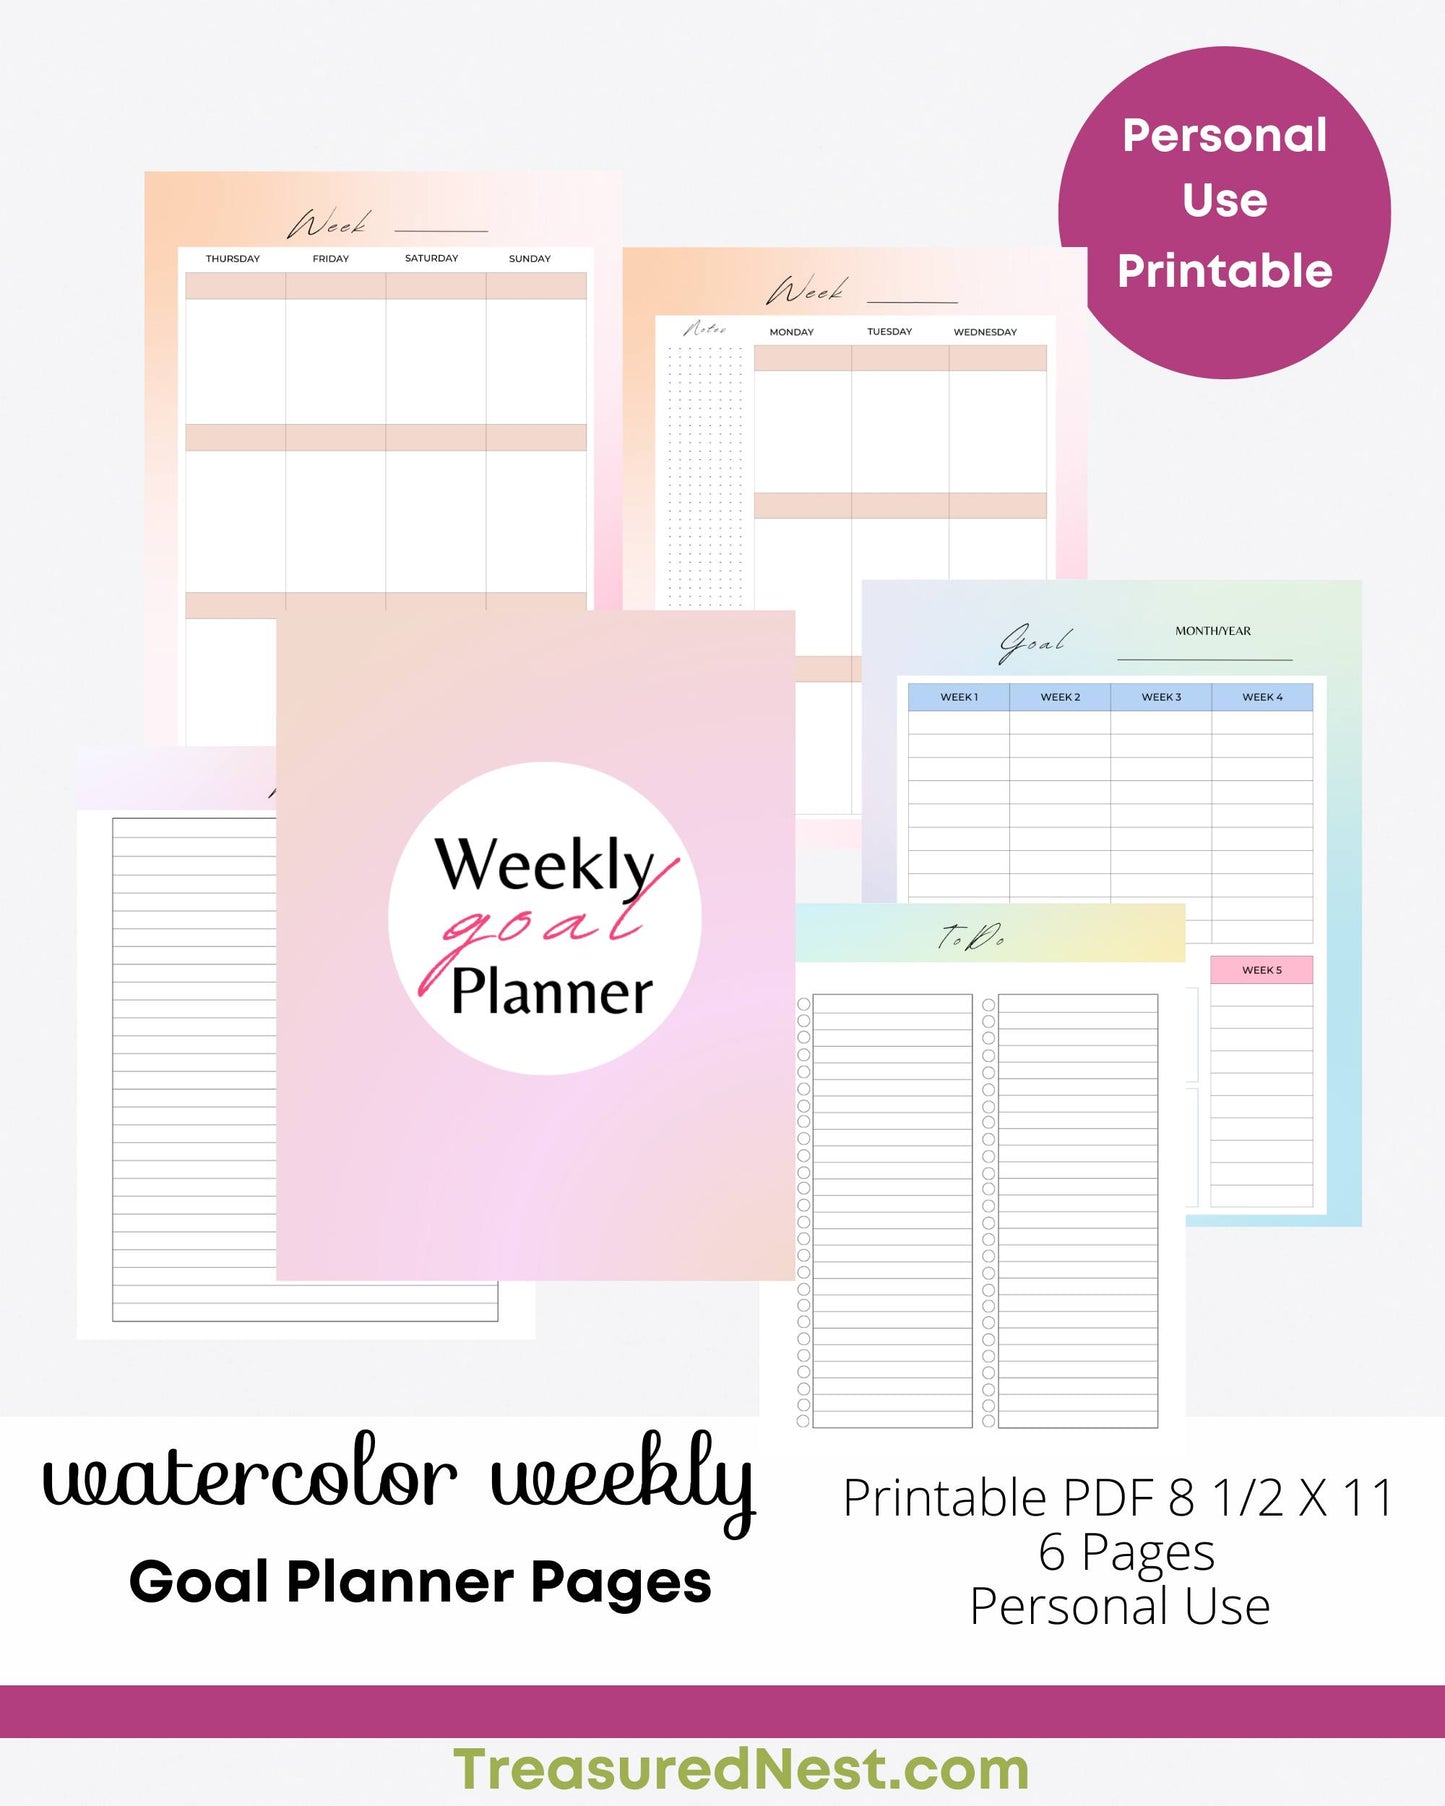 Watercolor Weekly Goal Planner Pages